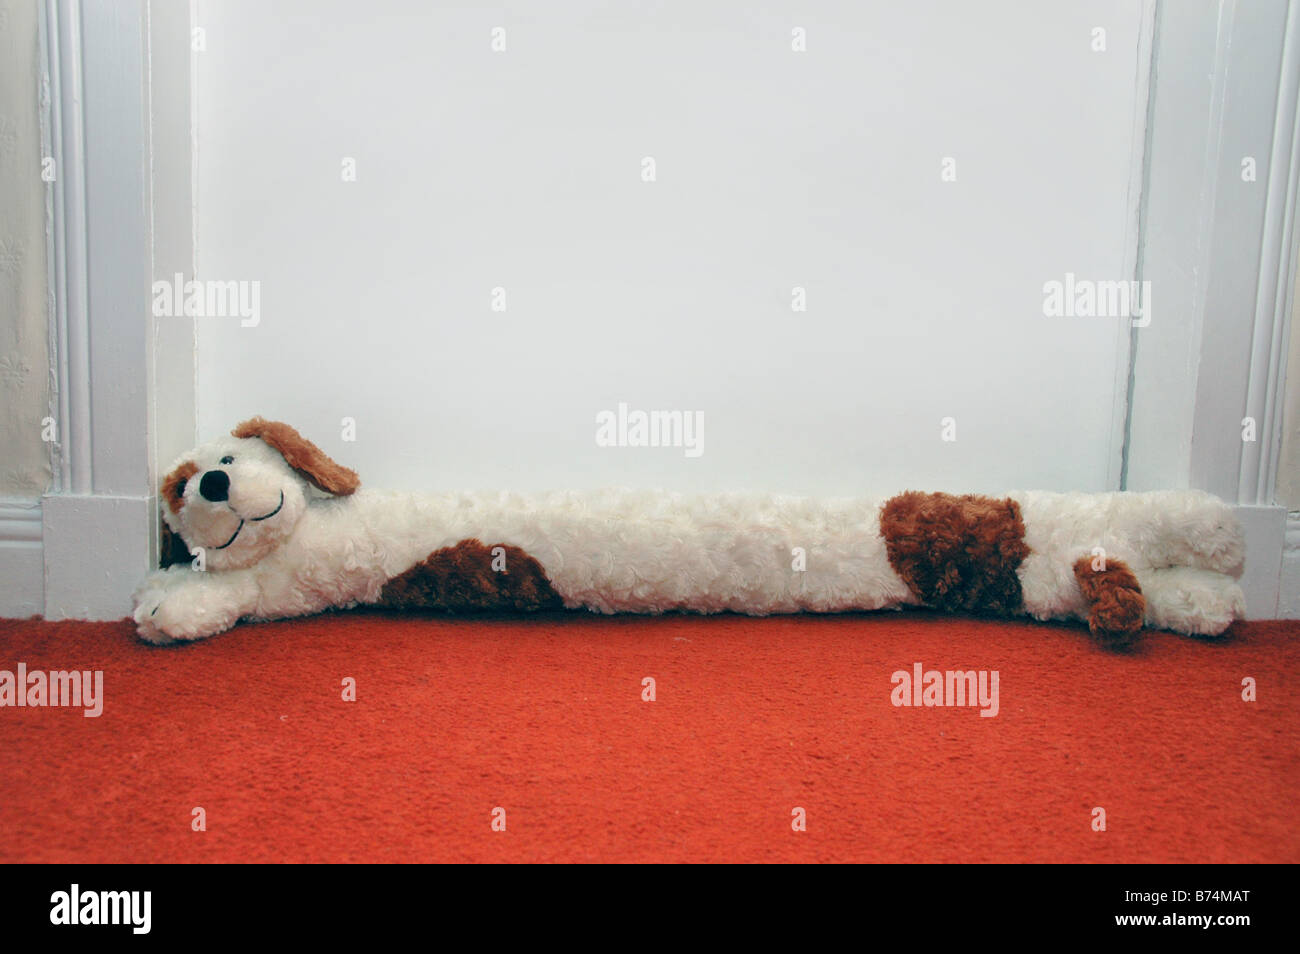 A dog shaped draft excluder lies at the base of a door. Stock Photo